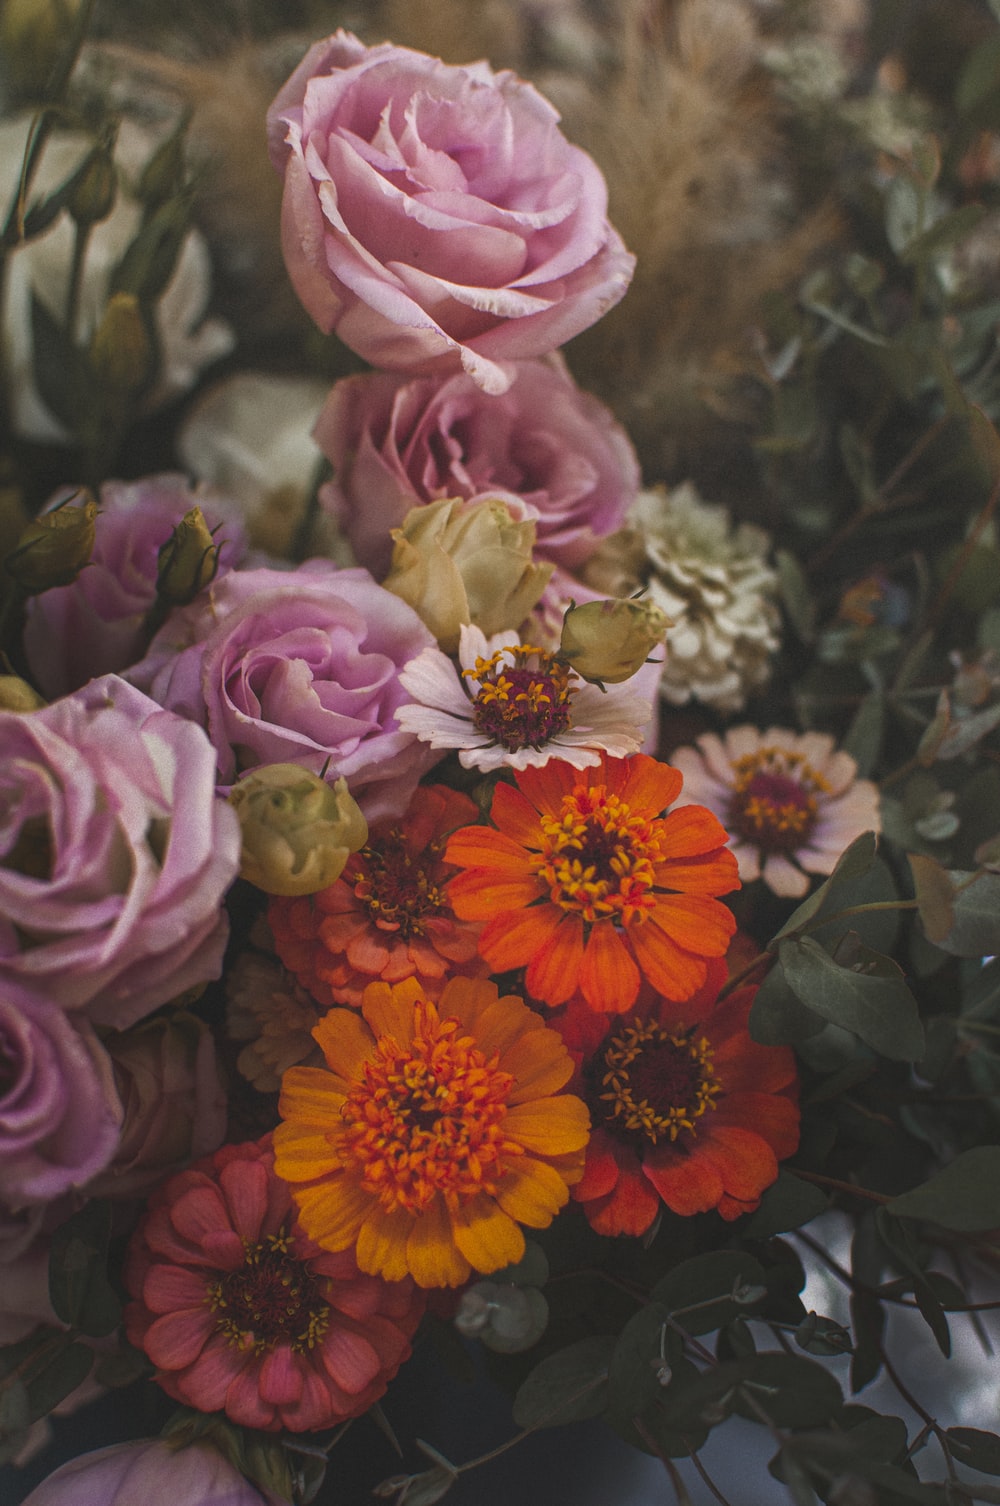 Fall Flowers Picture. Download Free Image